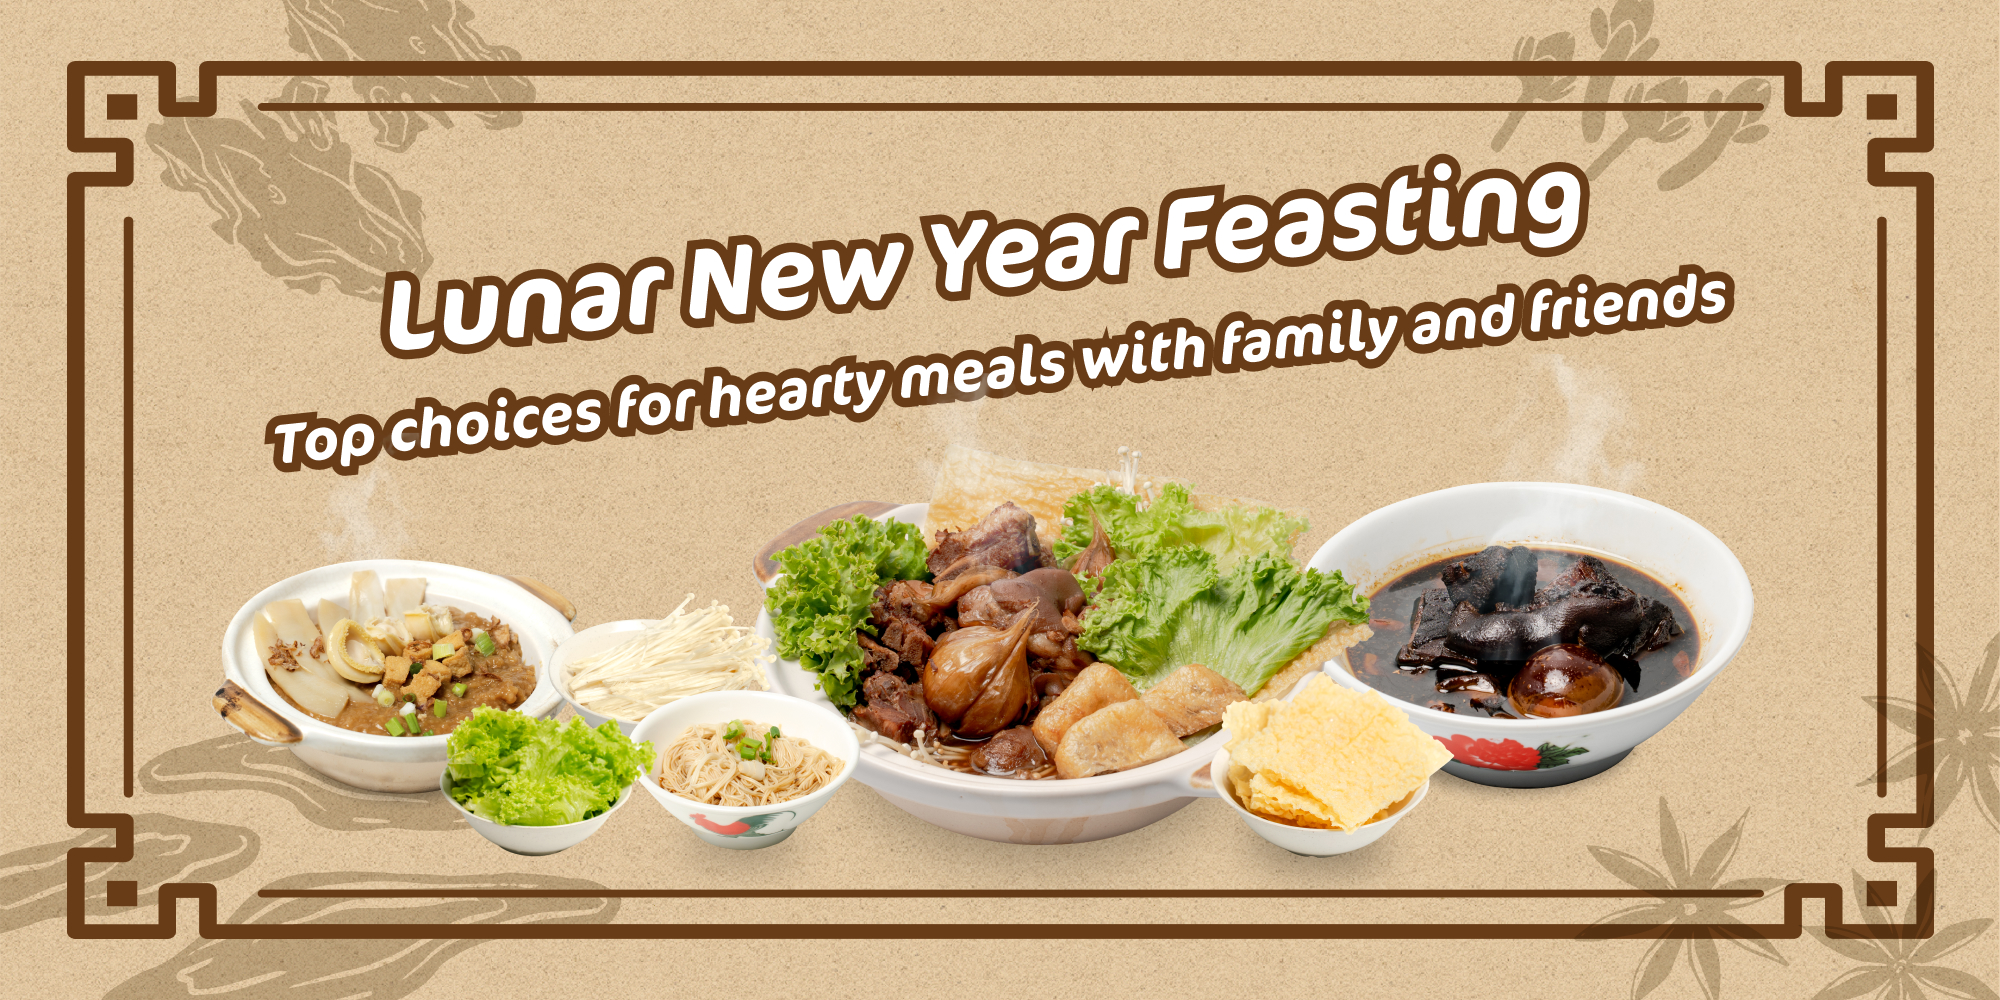 lunar-new-year-feast-with-family-and-friends